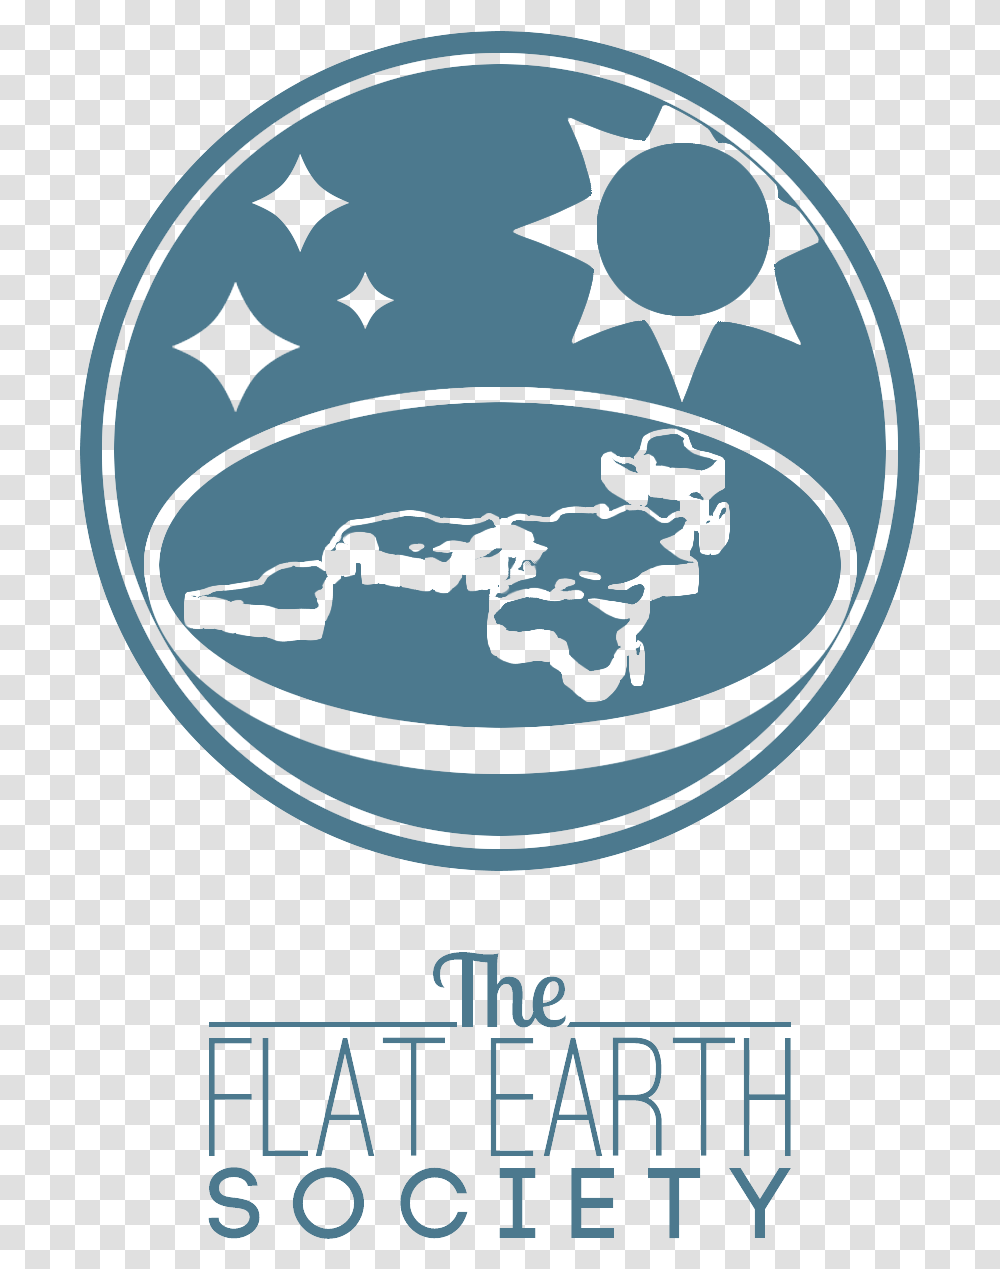 The Flat Earth Wiki Flat Earth Society Shirt, Poster, Advertisement, Label, Text Transparent Png